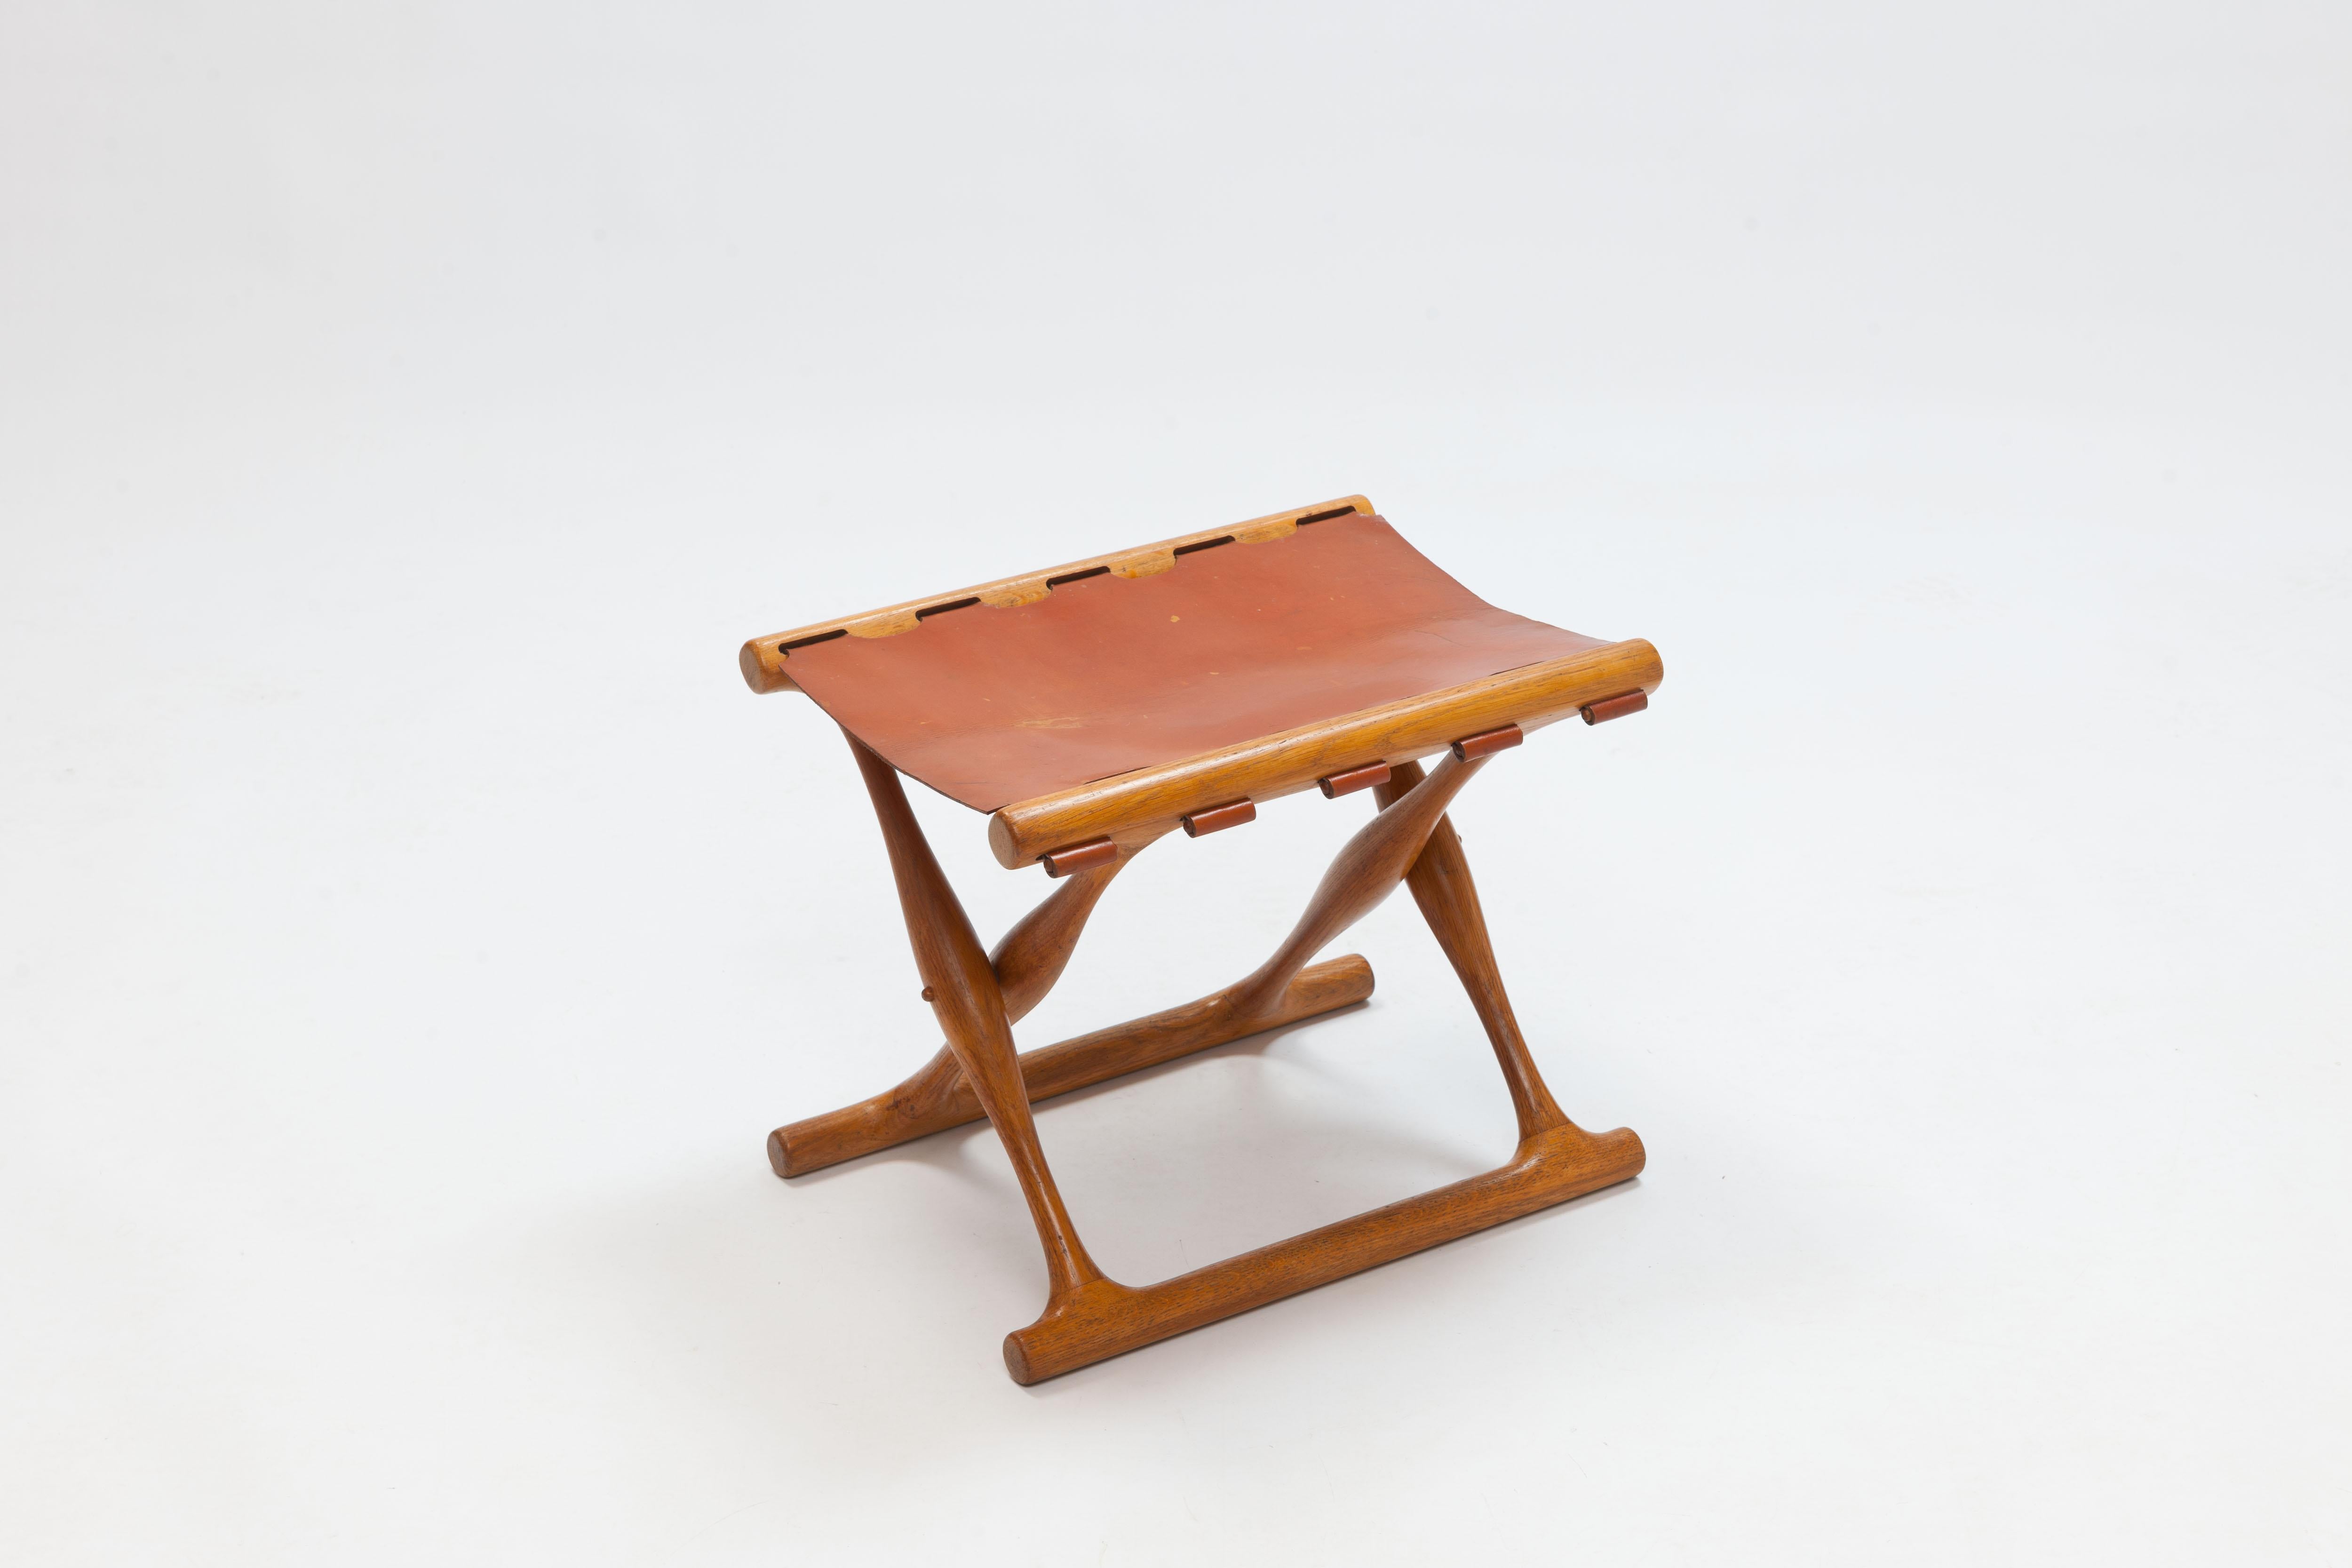 This folding stool, the 'Guldhøj Stole', was designed by Danish designer Poul Hundevad in 1948. Hundevad designed the folding stool after a very special chair; the 'Guldhøj Chair', an archaeological find, a chair, from the Scandinavian Bronze Age